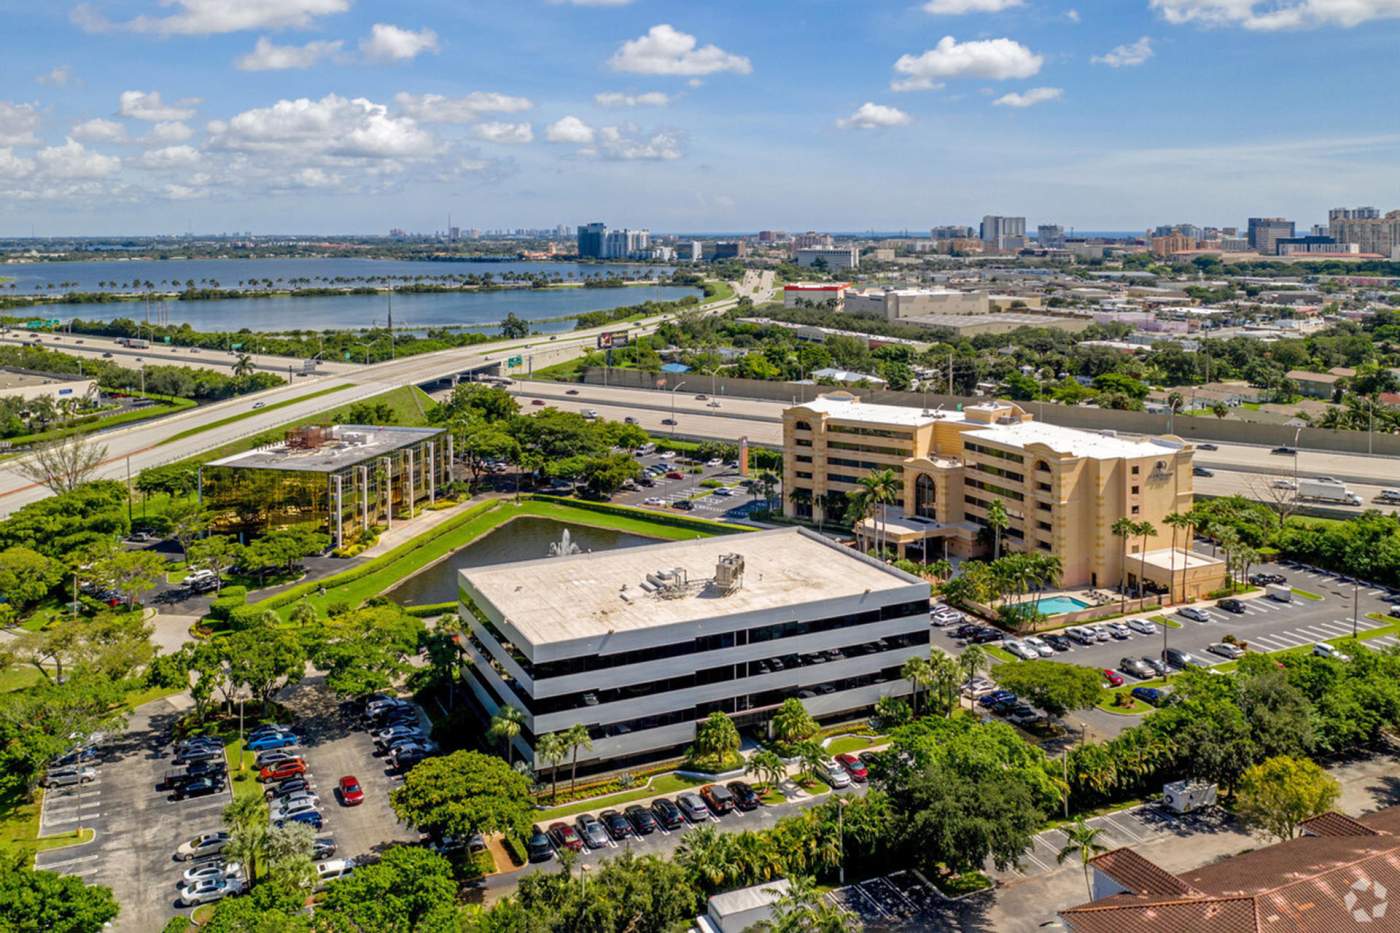 Commerce Pointe Silver aerial view and waterfront